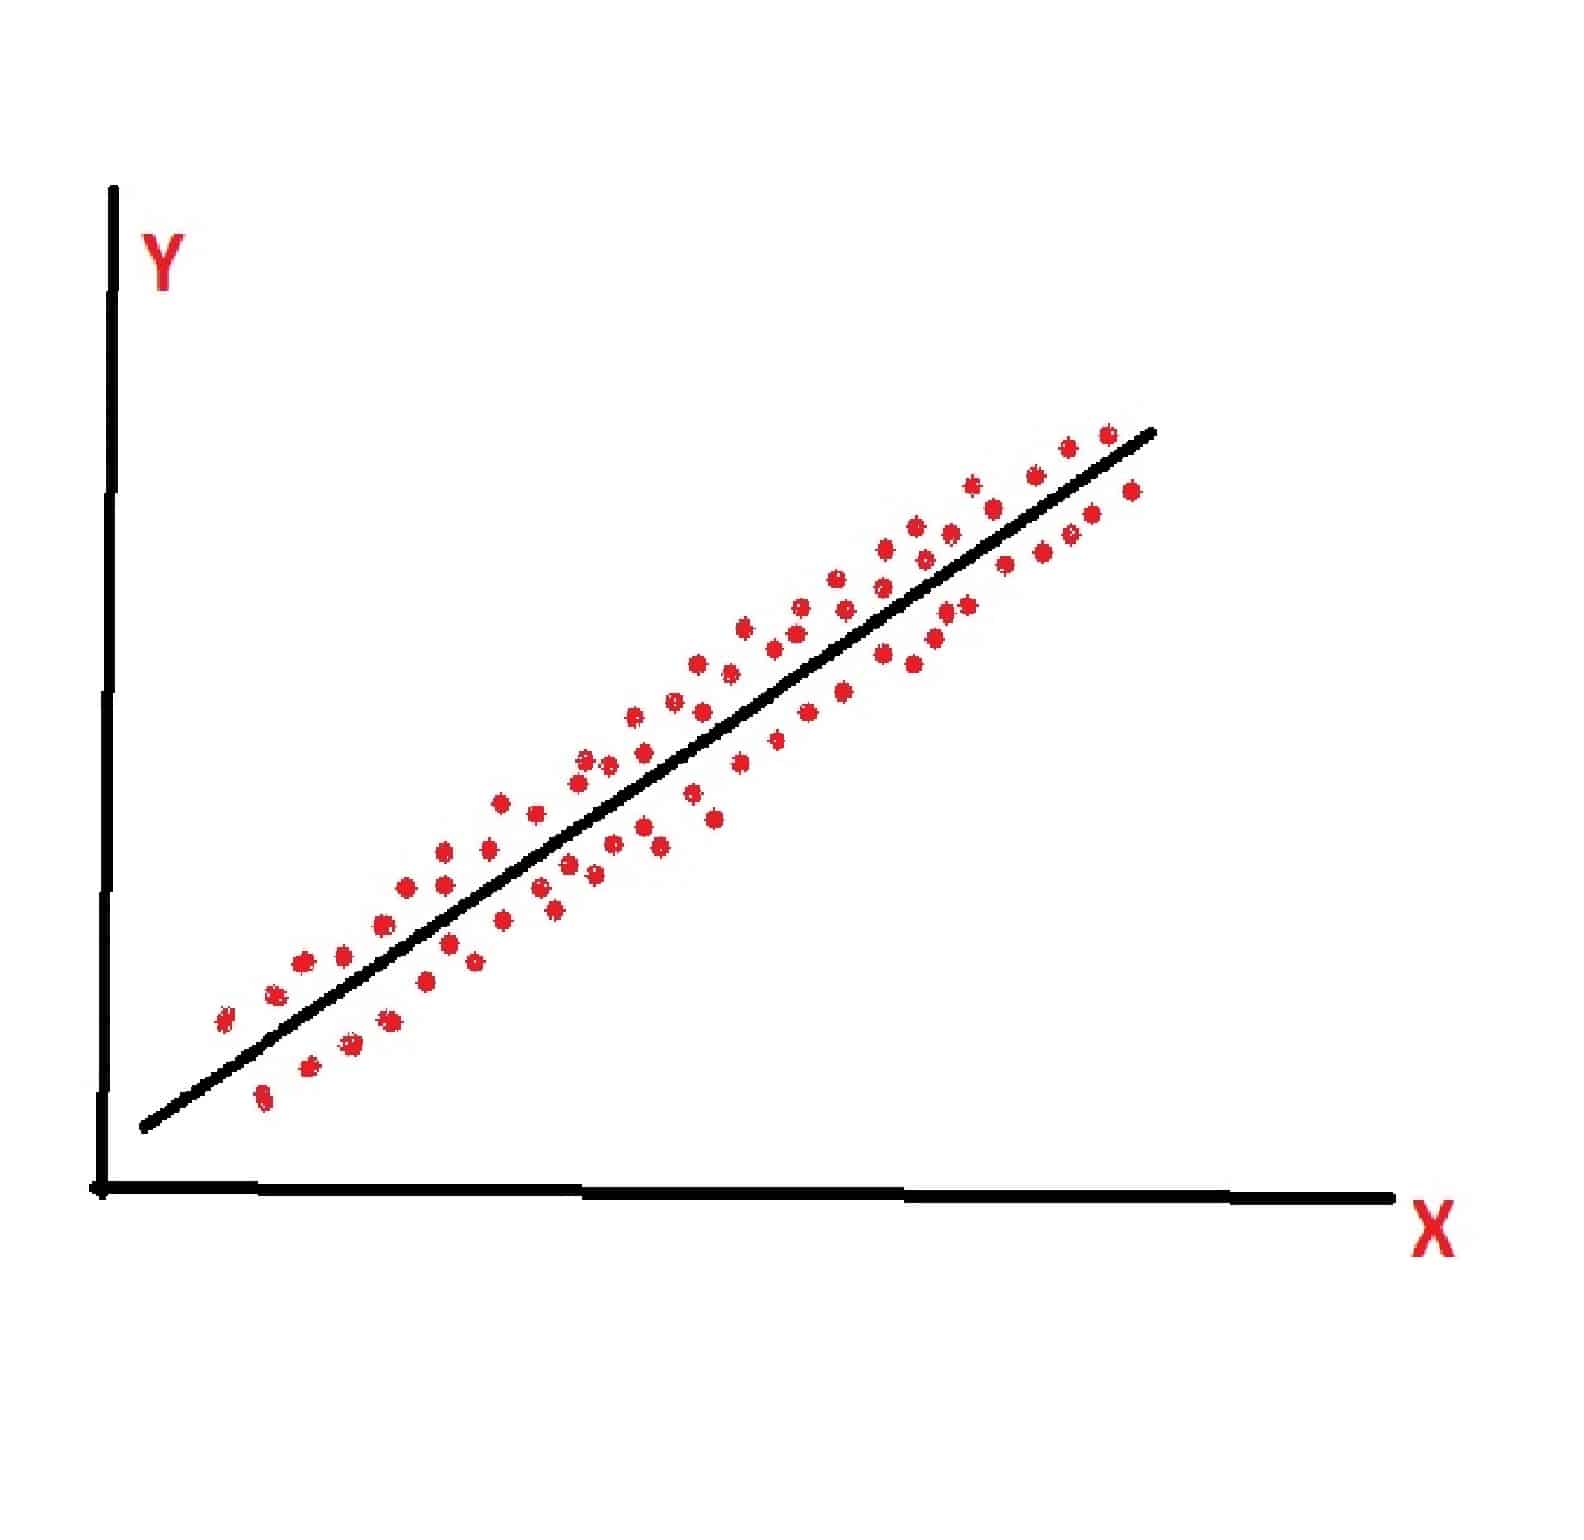 what does the linear regression mean